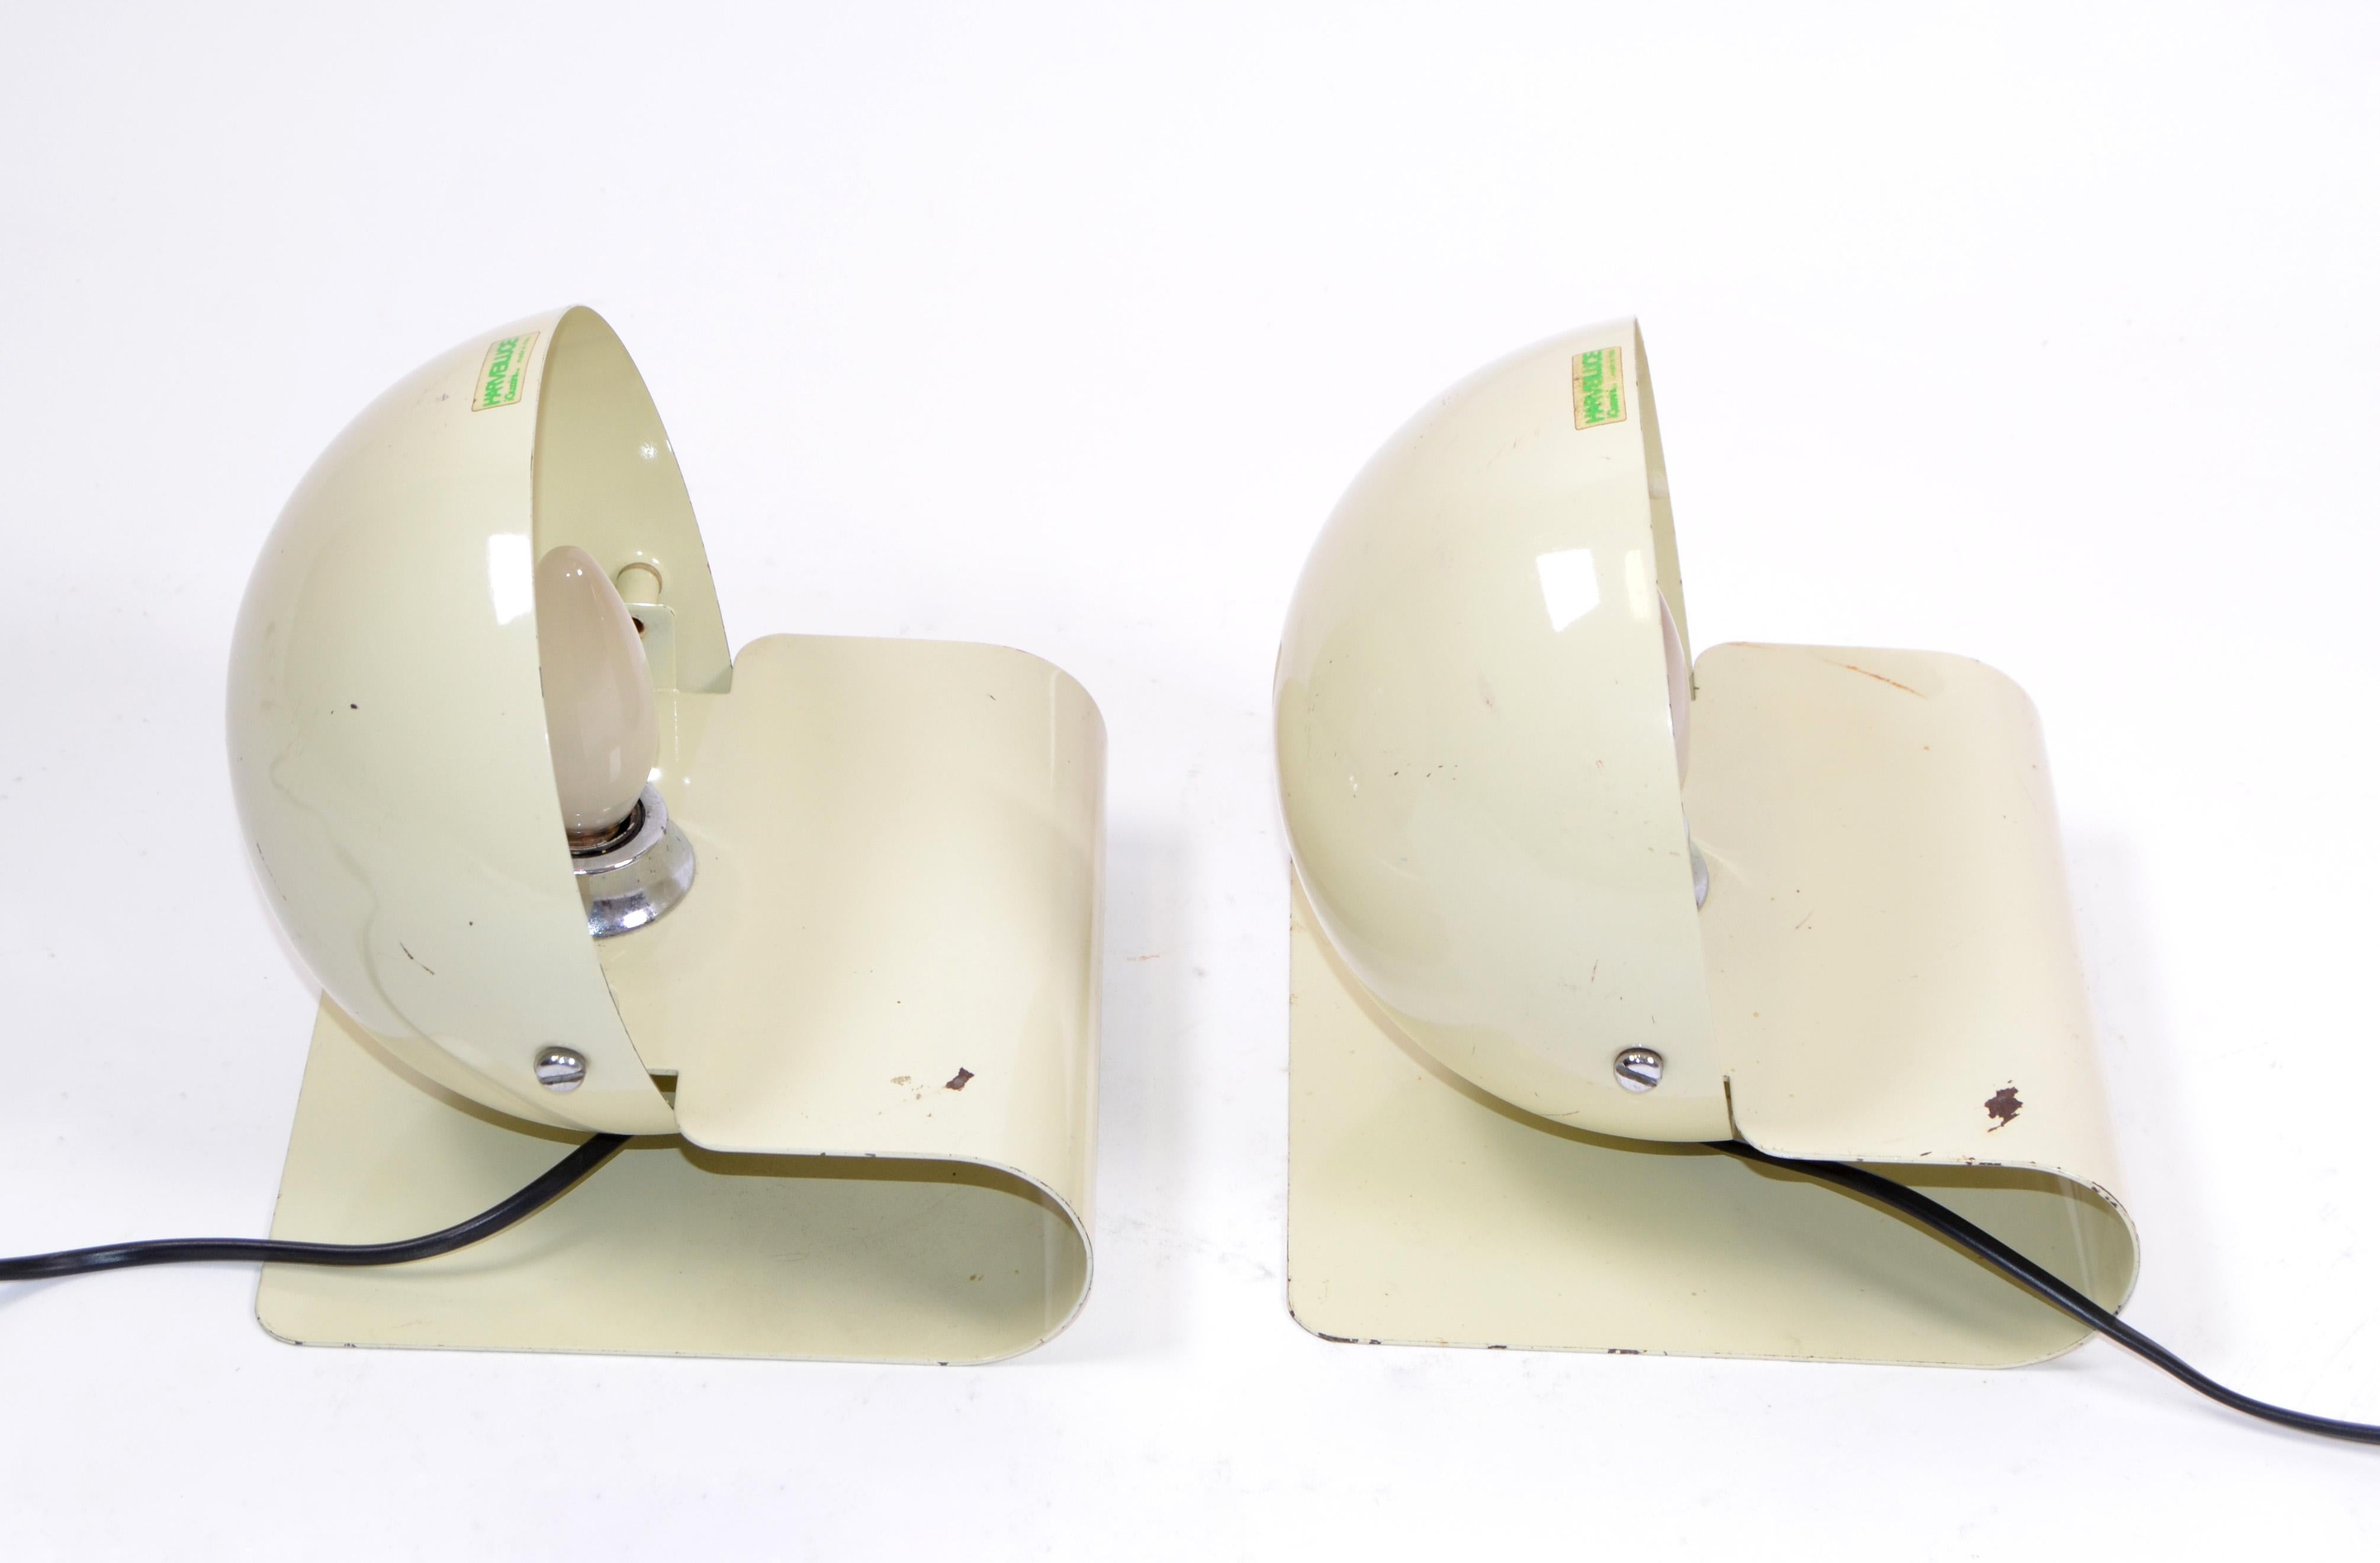 A pair of Giuseppe Cormio Space Age enameled metal 'Bugia' table lamps or bedside table lamps by Harveiluce IGuzzini, made in 1976, Italy.
The beige color was rare in the year of 1976.
Makers mark label on the globe.
The set is wired for Europe,